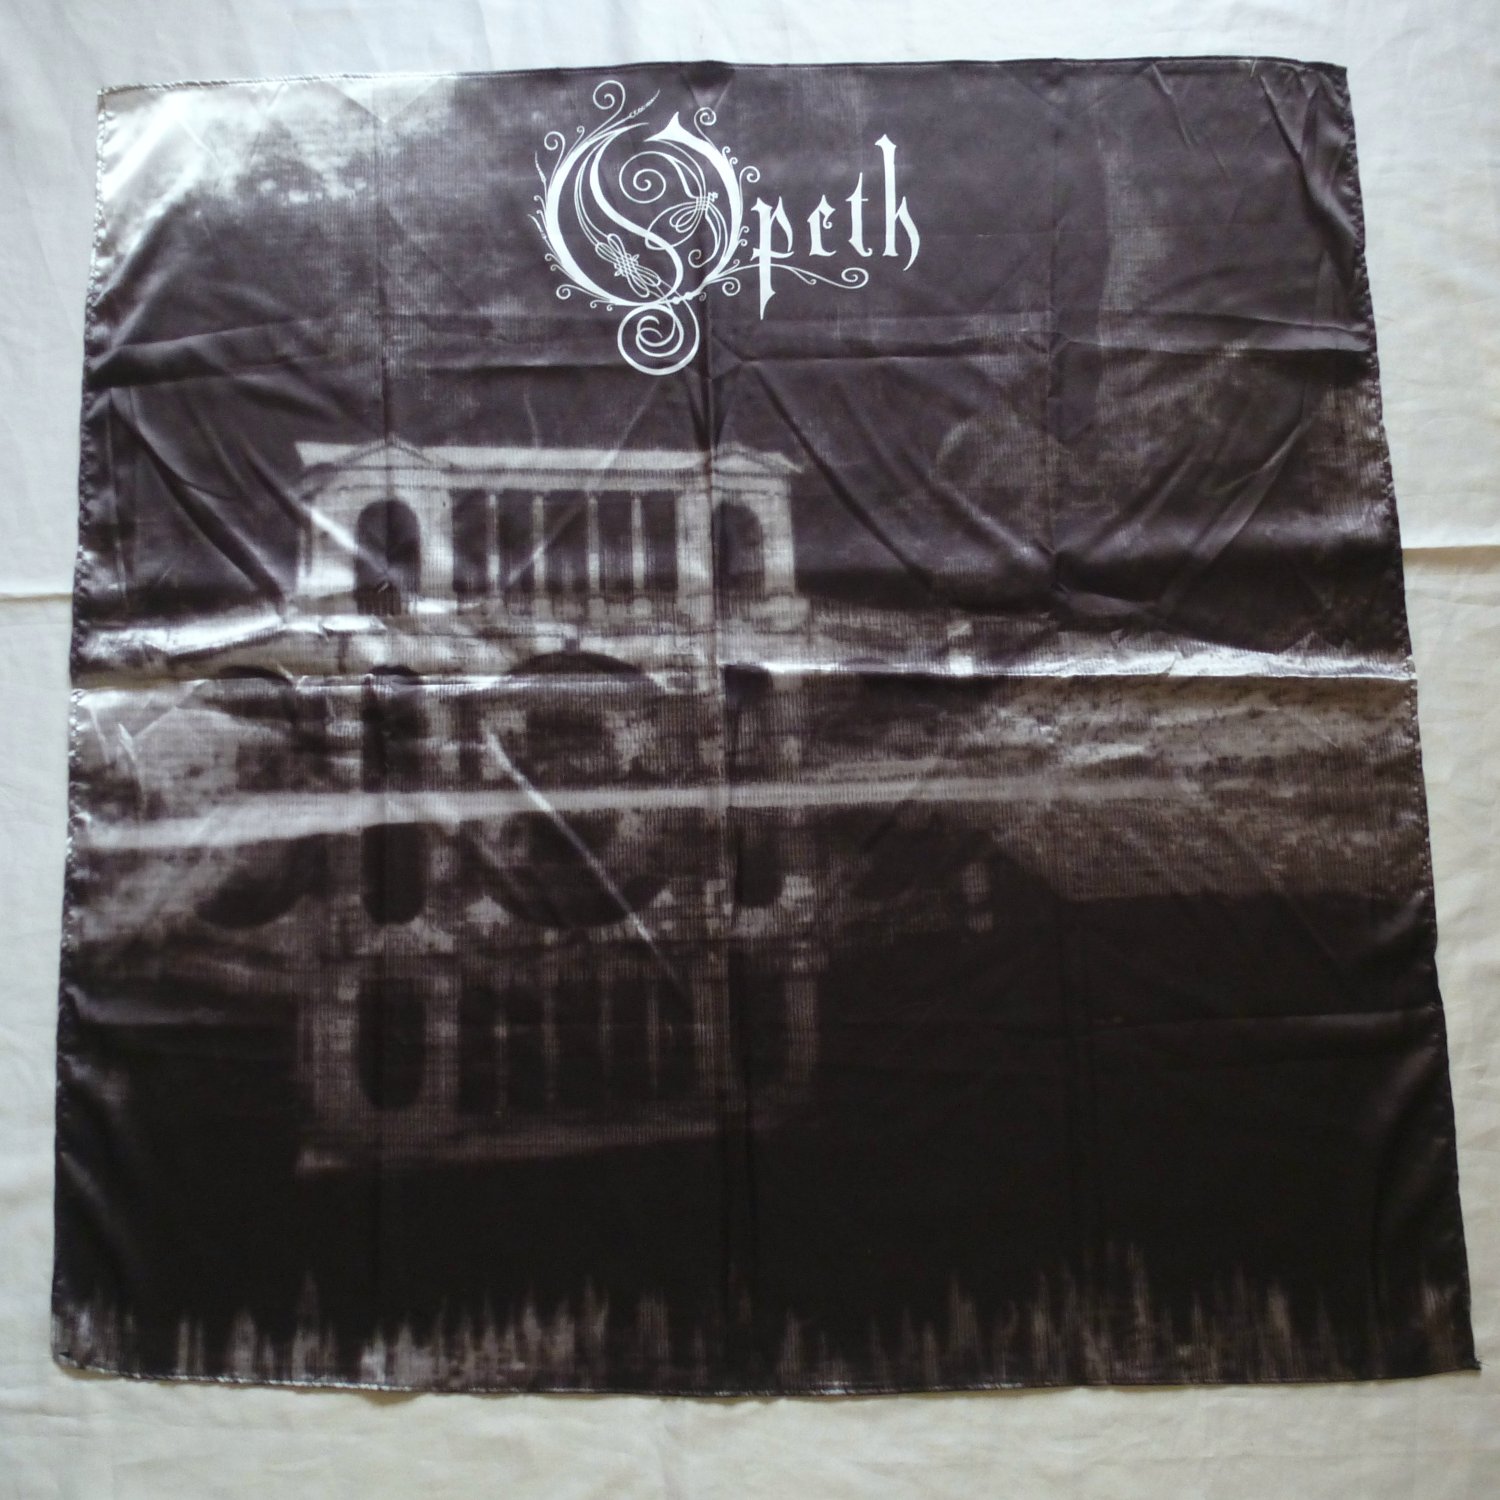 OPETH - Morningrise FLAG cloth Poster Banner 3'x3' Heavy Death METAL